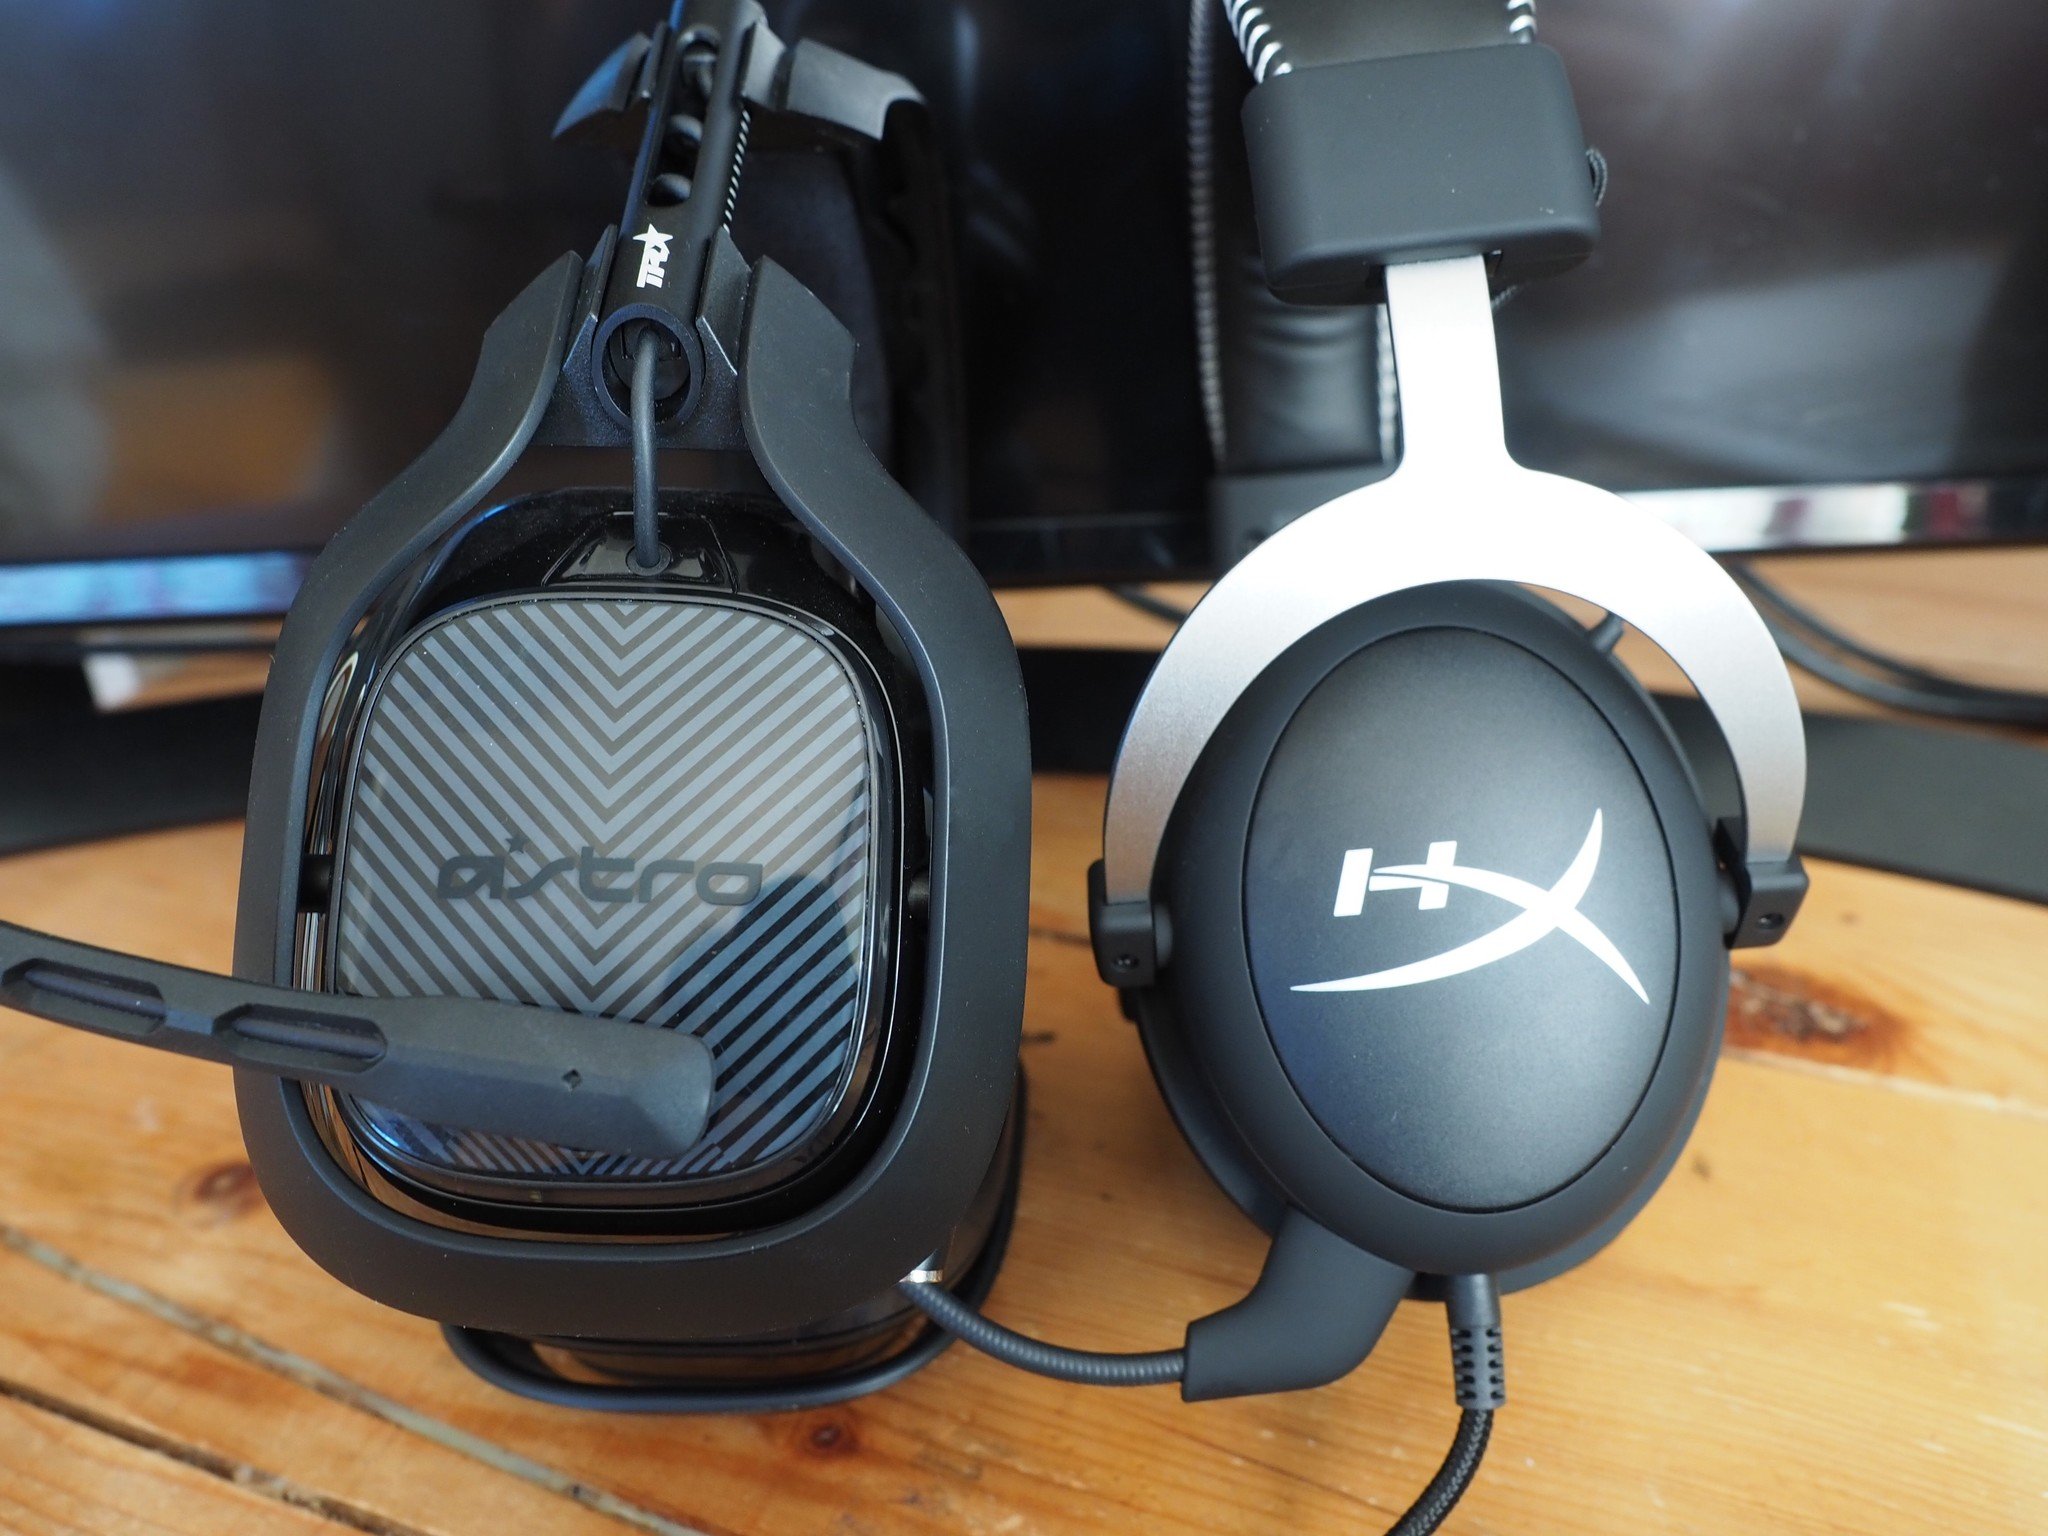 Hyperx Cloudx Vs Astro A40 Tr Which Xbox Headset Should You Buy Windows Central